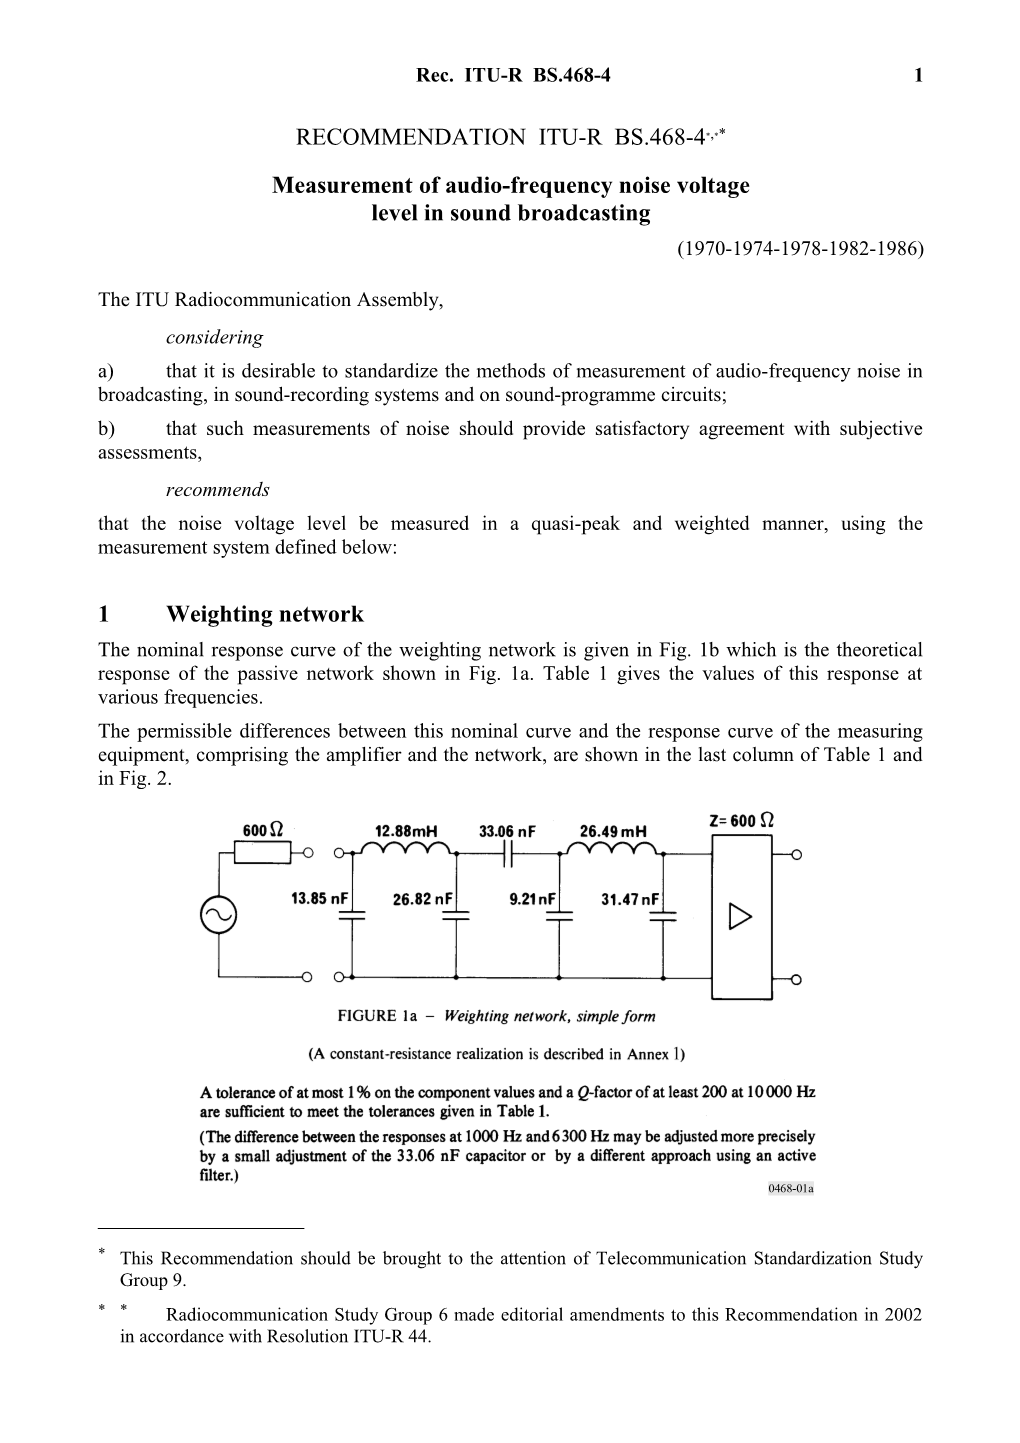 RECOMMENDATION ITU-R BS.468-4*, - Measurement of Audio-Frequency Noise Voltage Level In